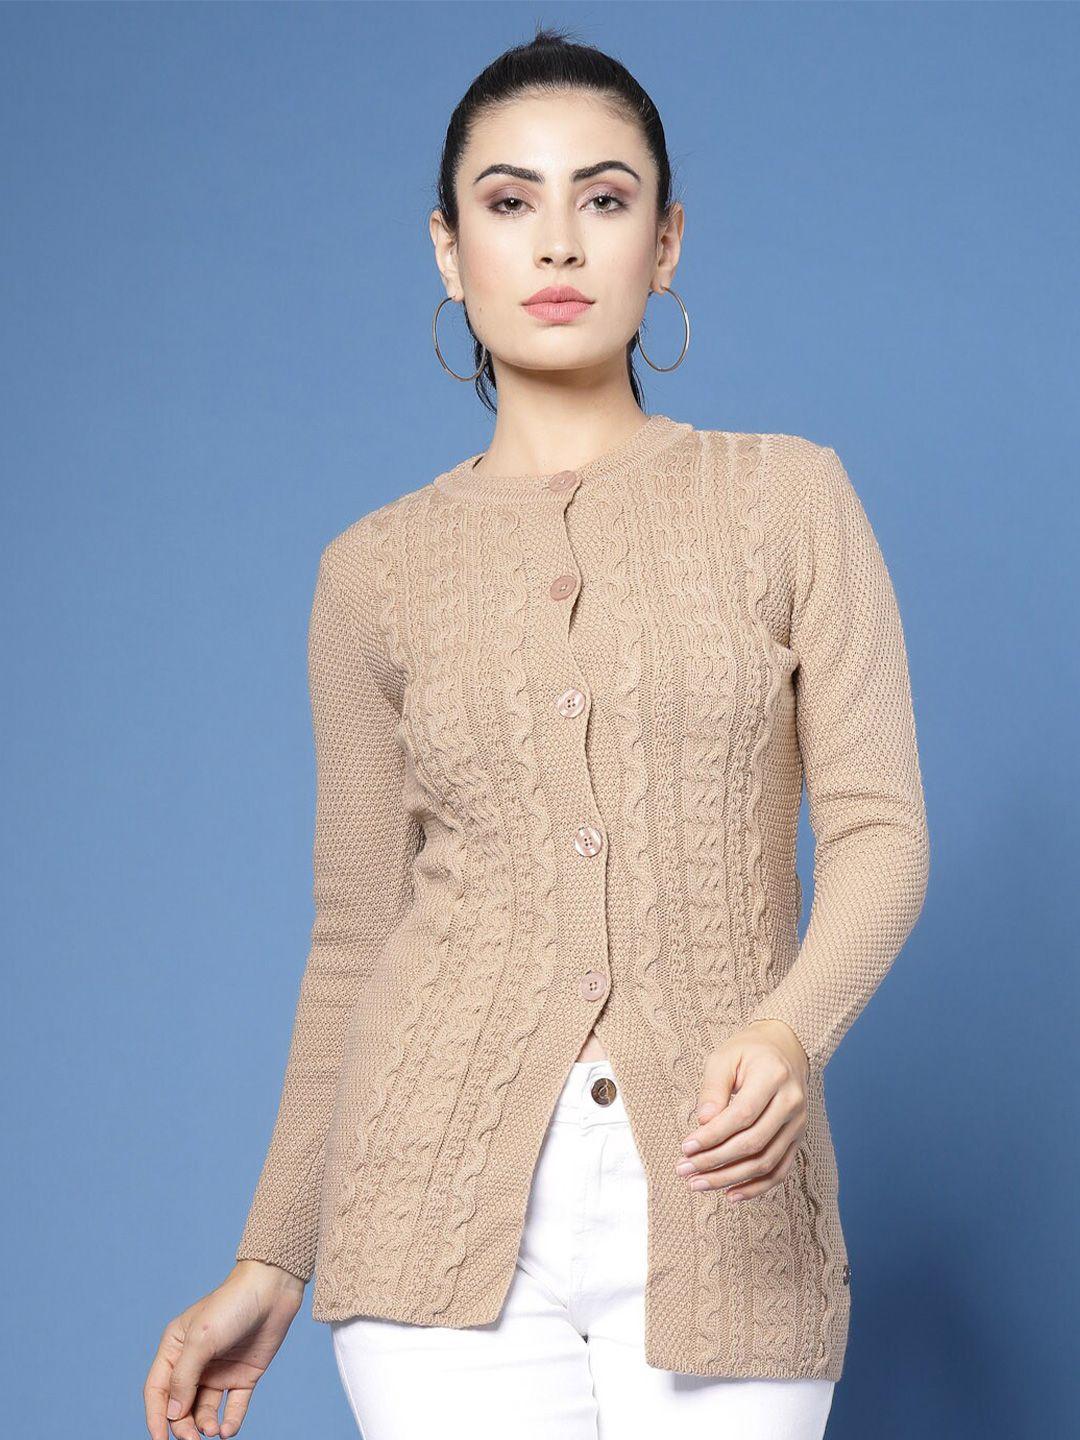 wool trees cable knit self design longline acrylic cardigan sweater